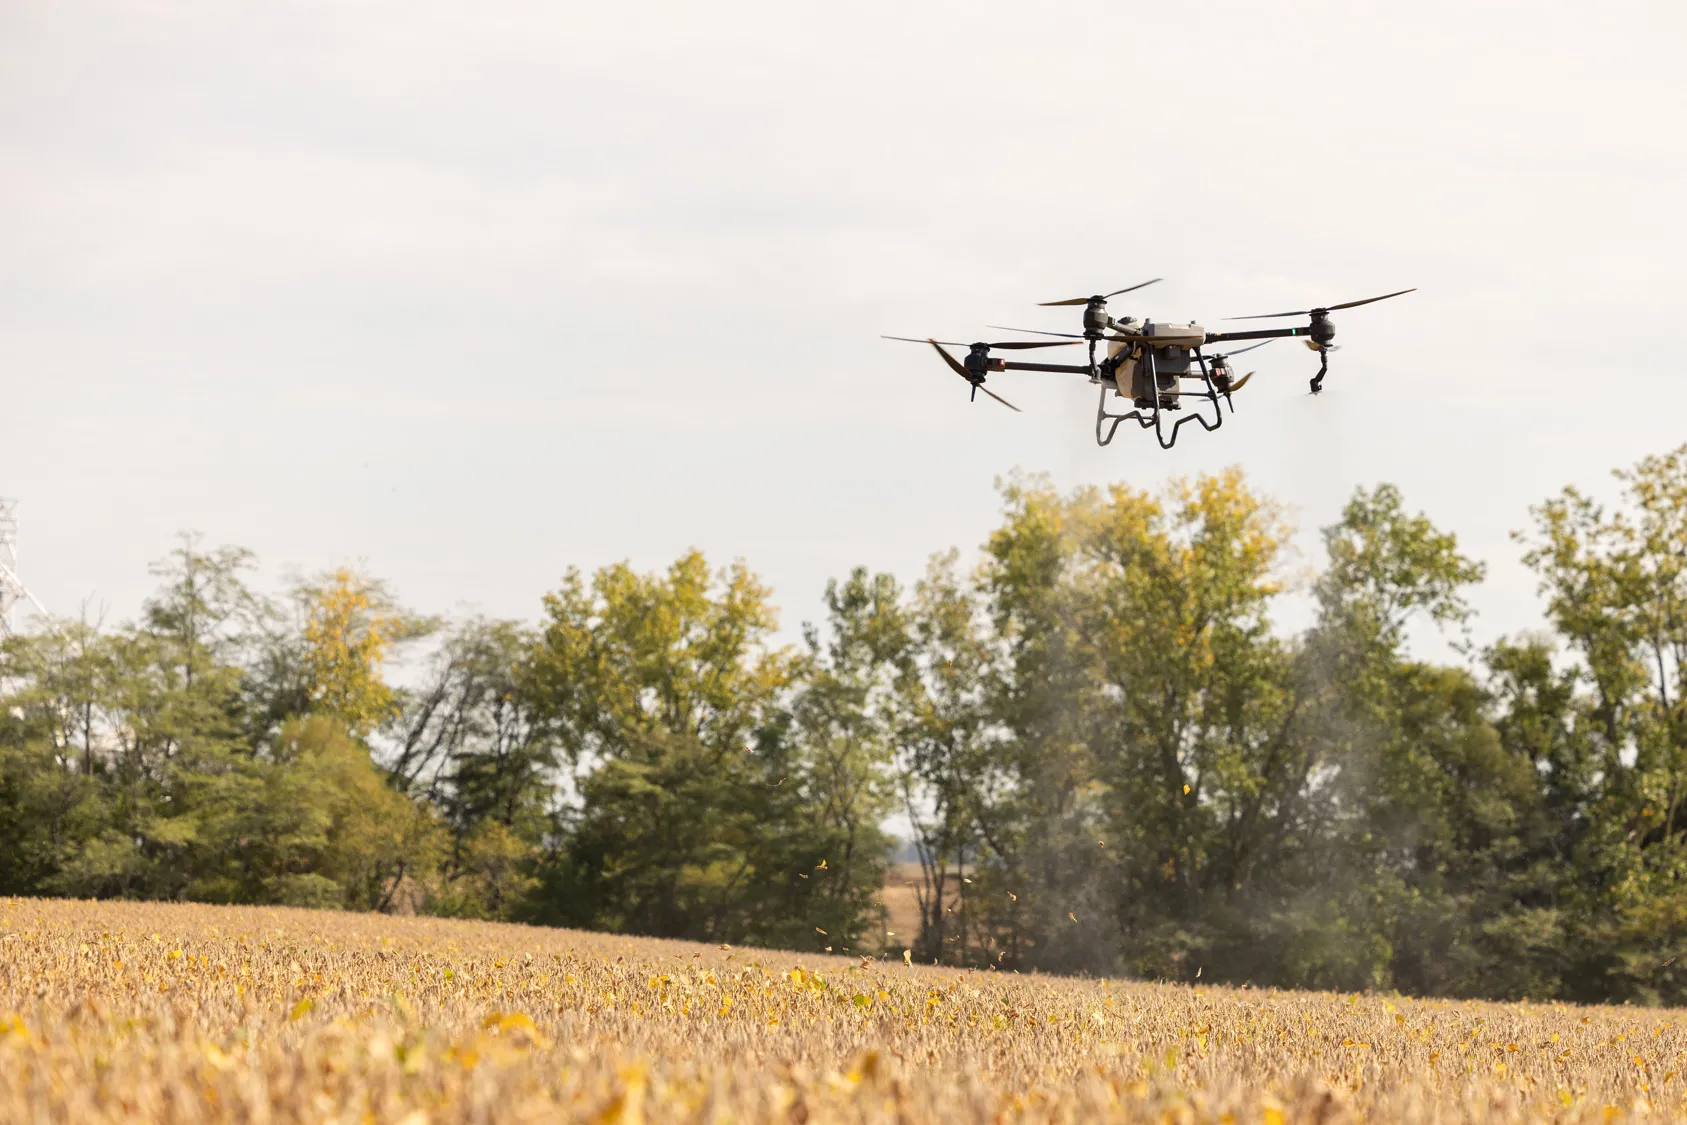 A drone flies above an out-of-focus field that is likely winter corn. In the distance there is a line of trees. The helicopter-like drone has three propellers pointing up, two sprayers on propeller arms pointing down, and thick wire stands hanging down from front and back. 